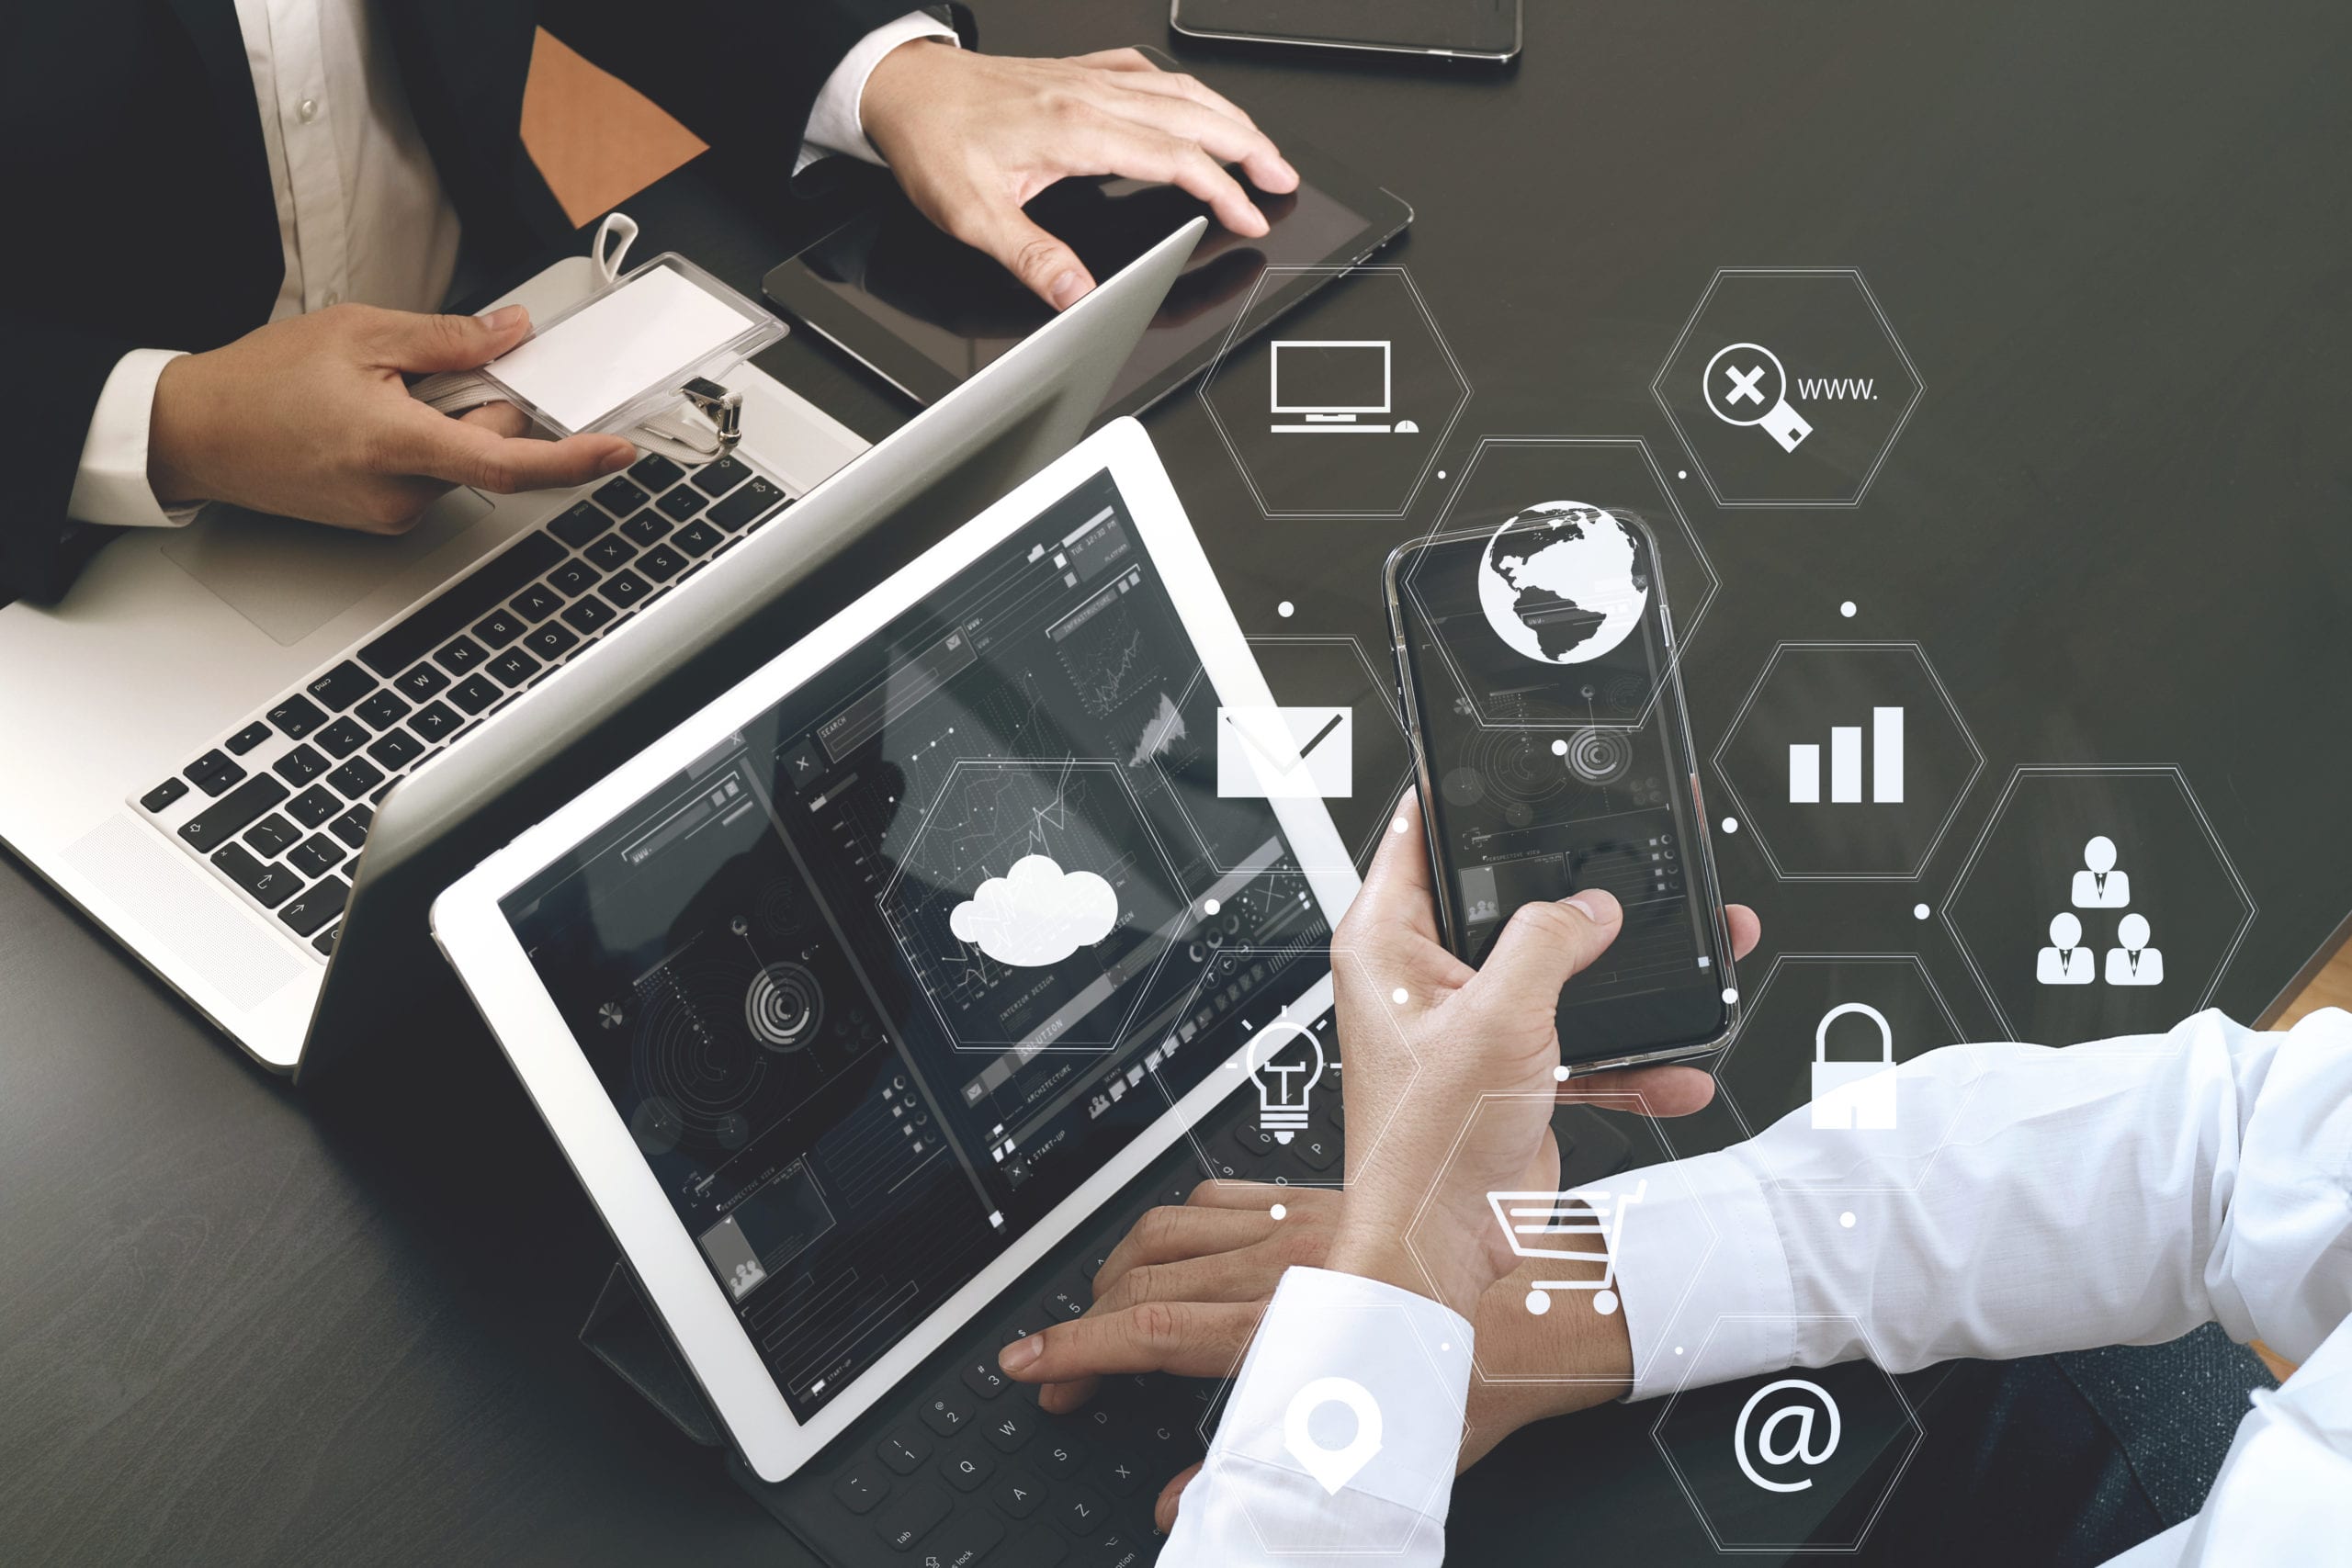 How Health Data Sharing Impacts How Clinicians Care for Patients | Healthcare IT Today